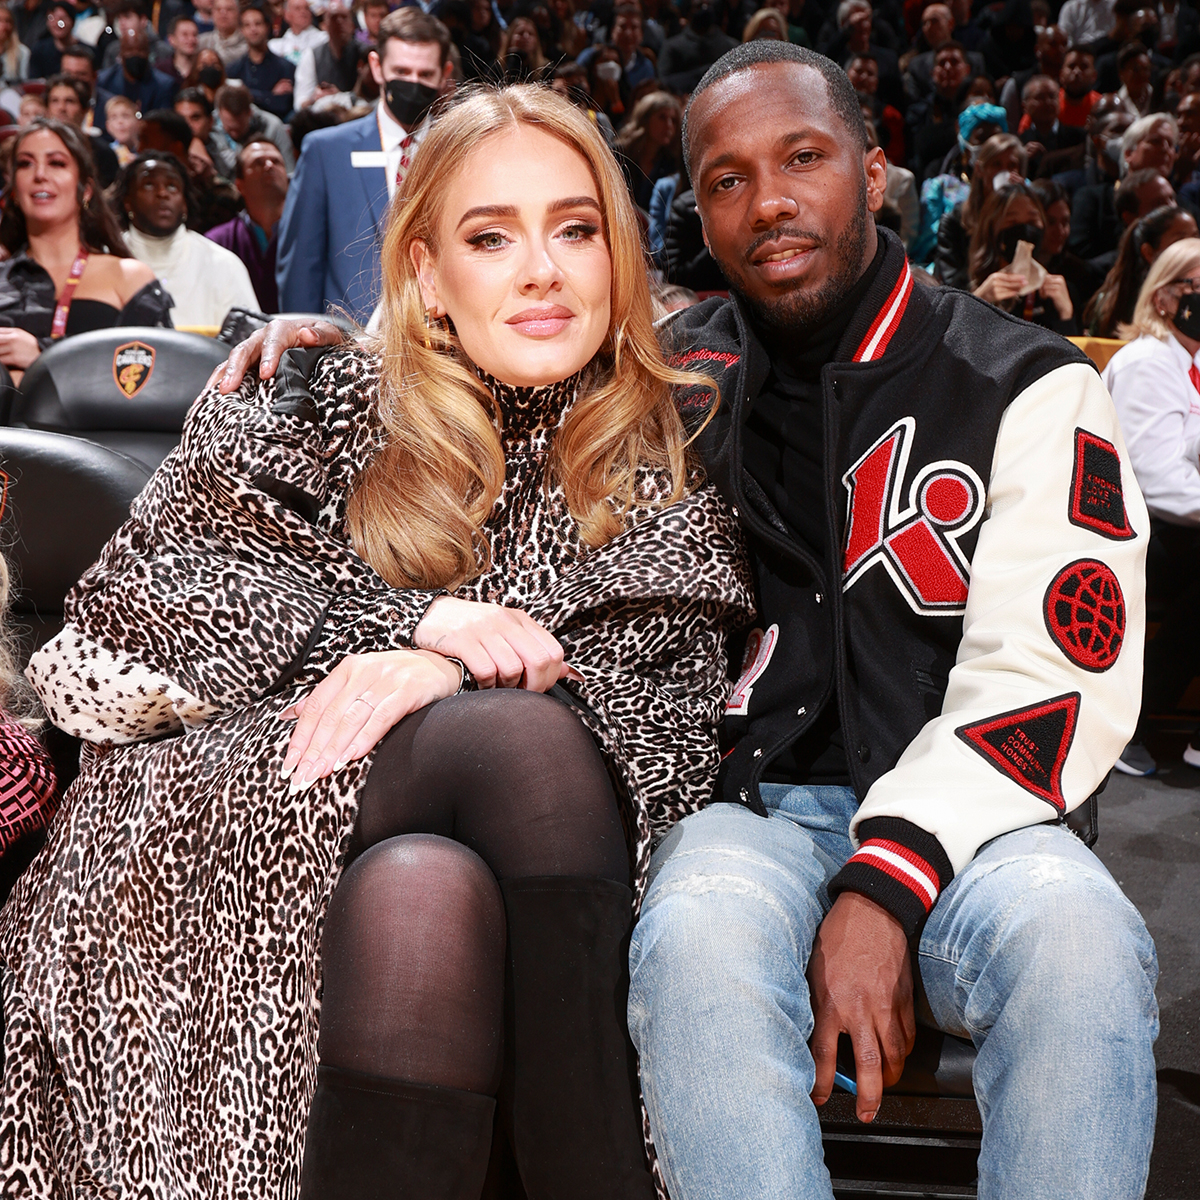 See Adele and Rich Paul Enjoy a Cozy Date Night in Coordinating